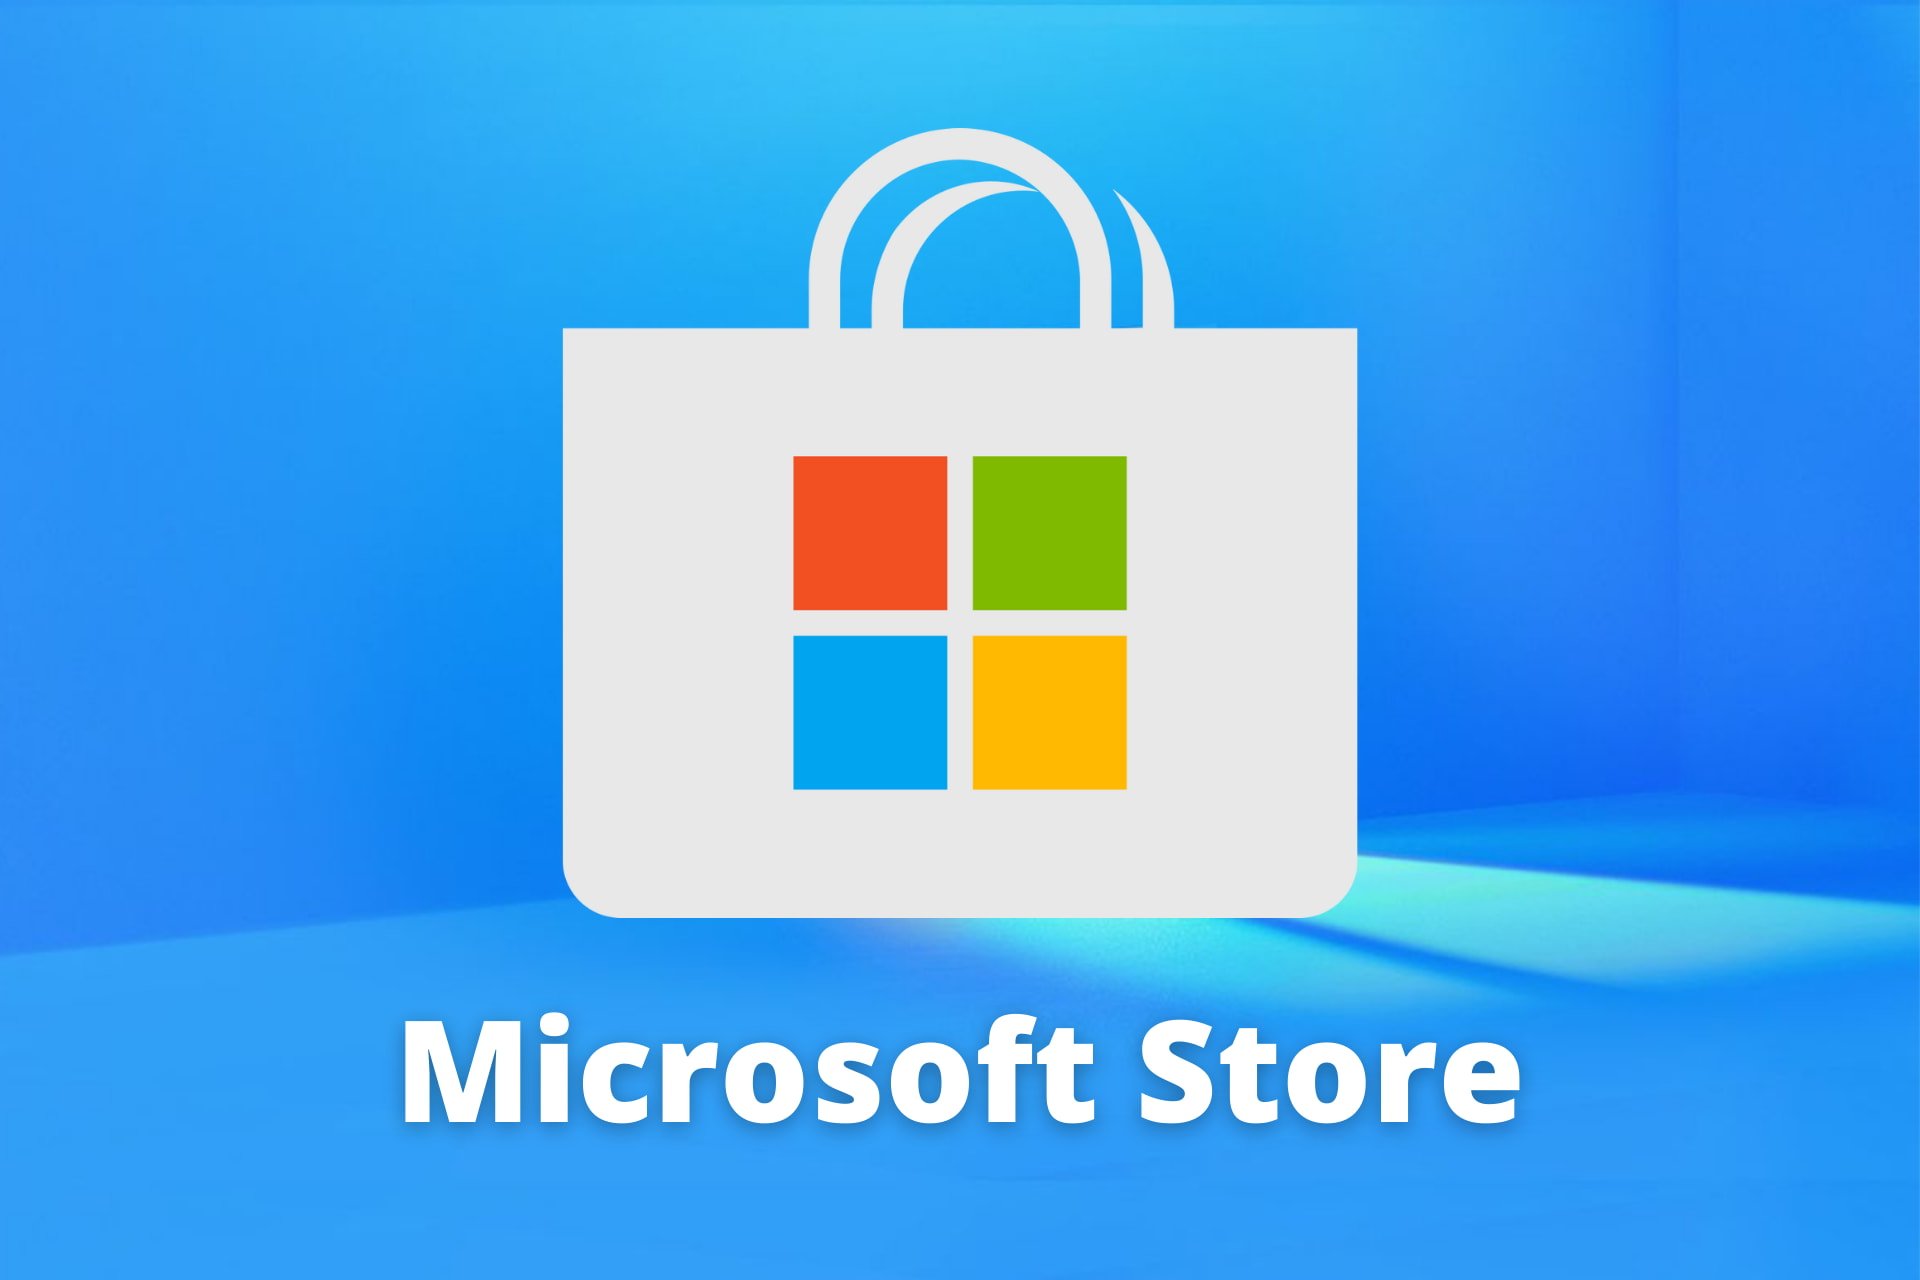 Microsoft Store purchased moments ago